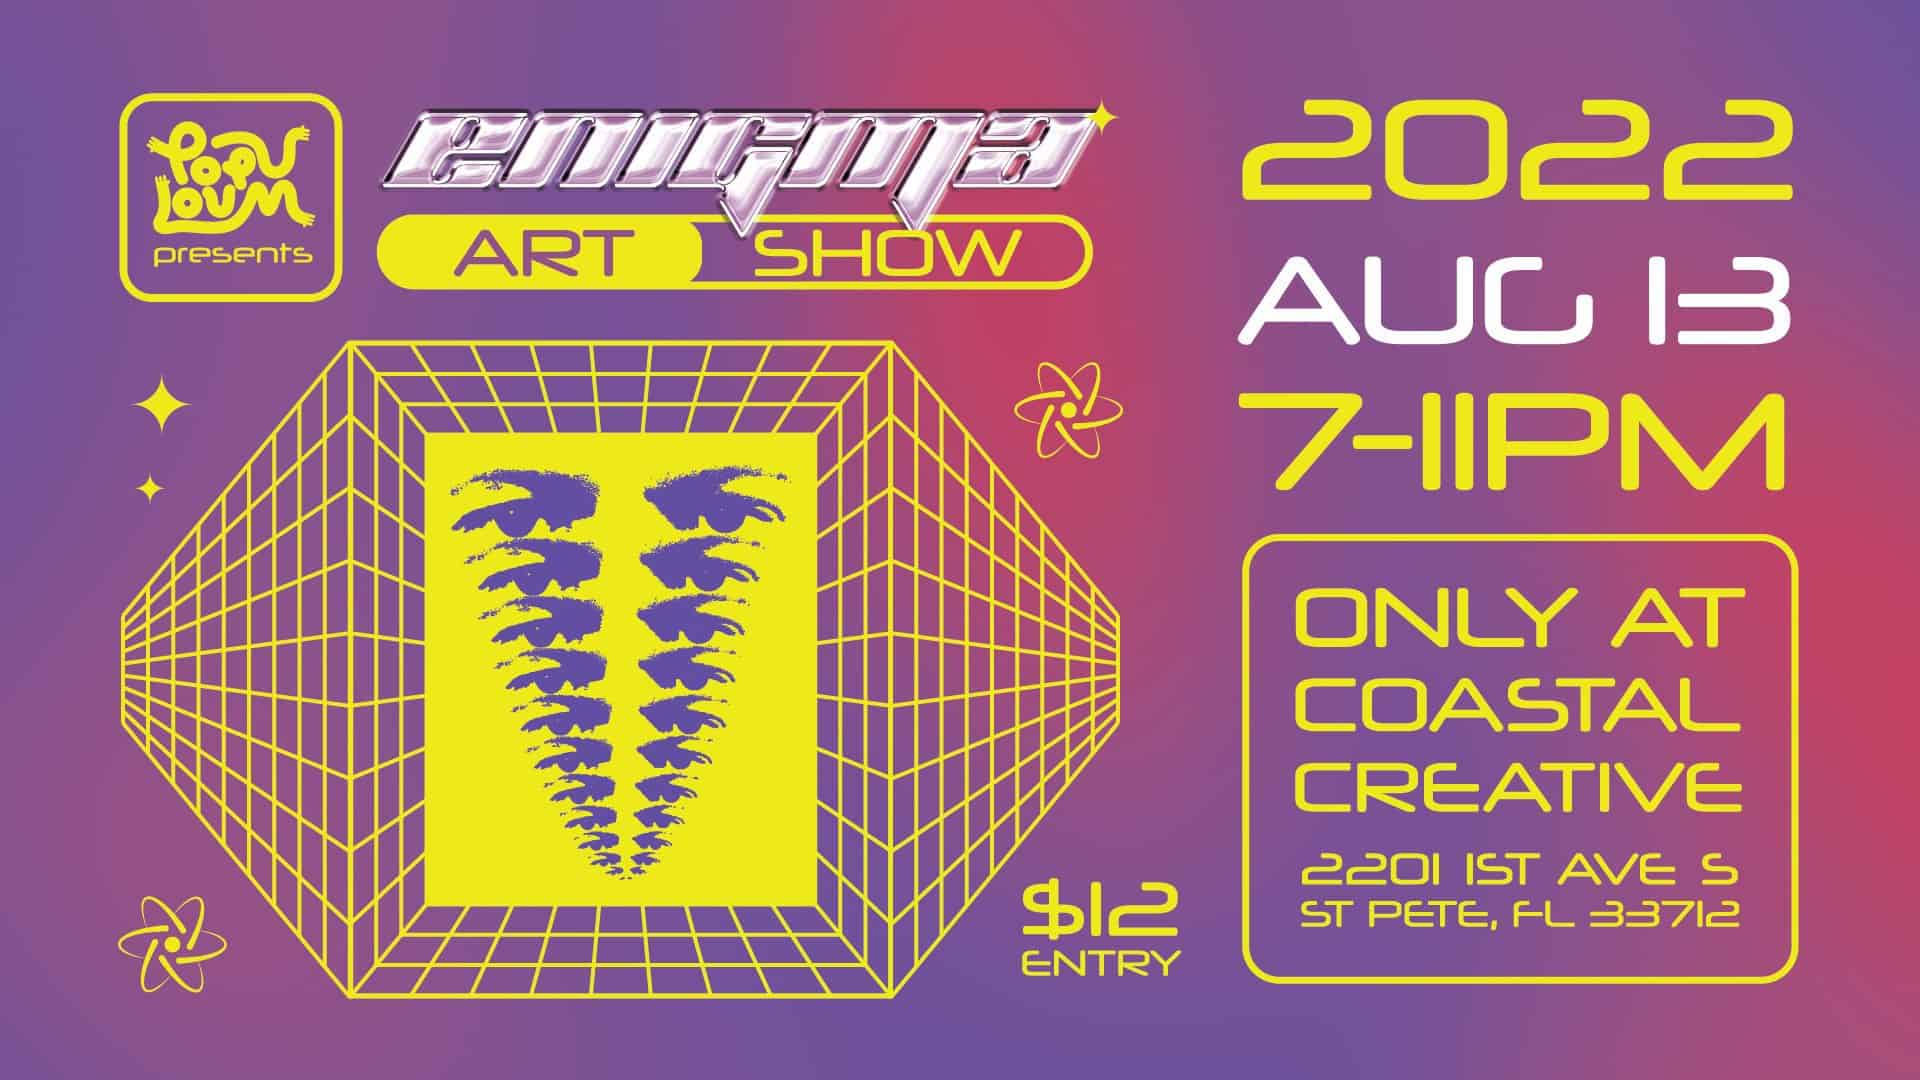 Enigma Art Show 2022 August 13 7pm-11pm only at coastal creative